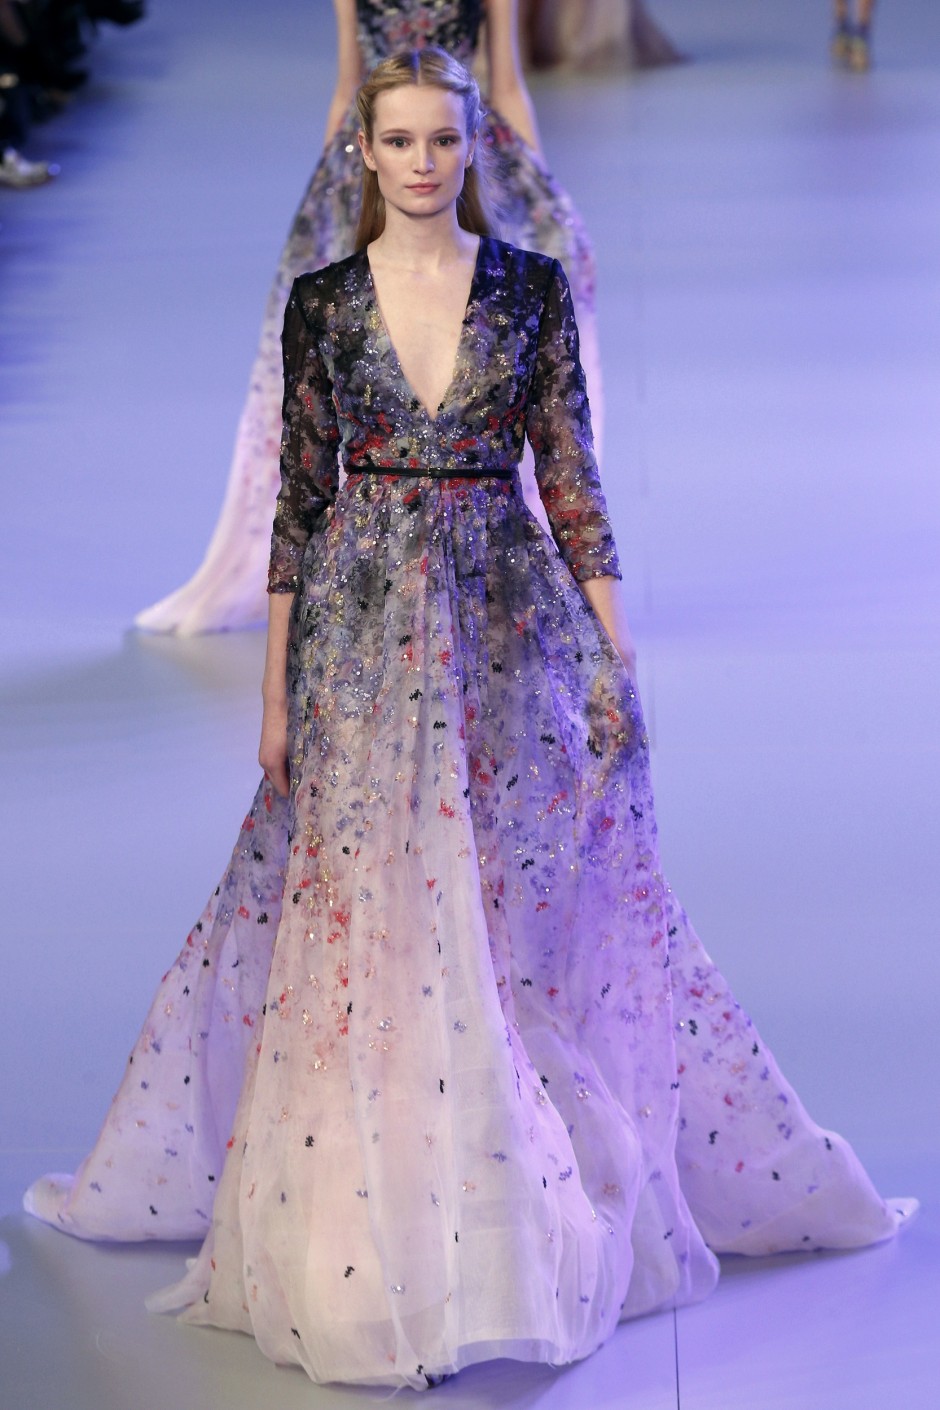 Different Colors of Wedding Dress by Elie Saab